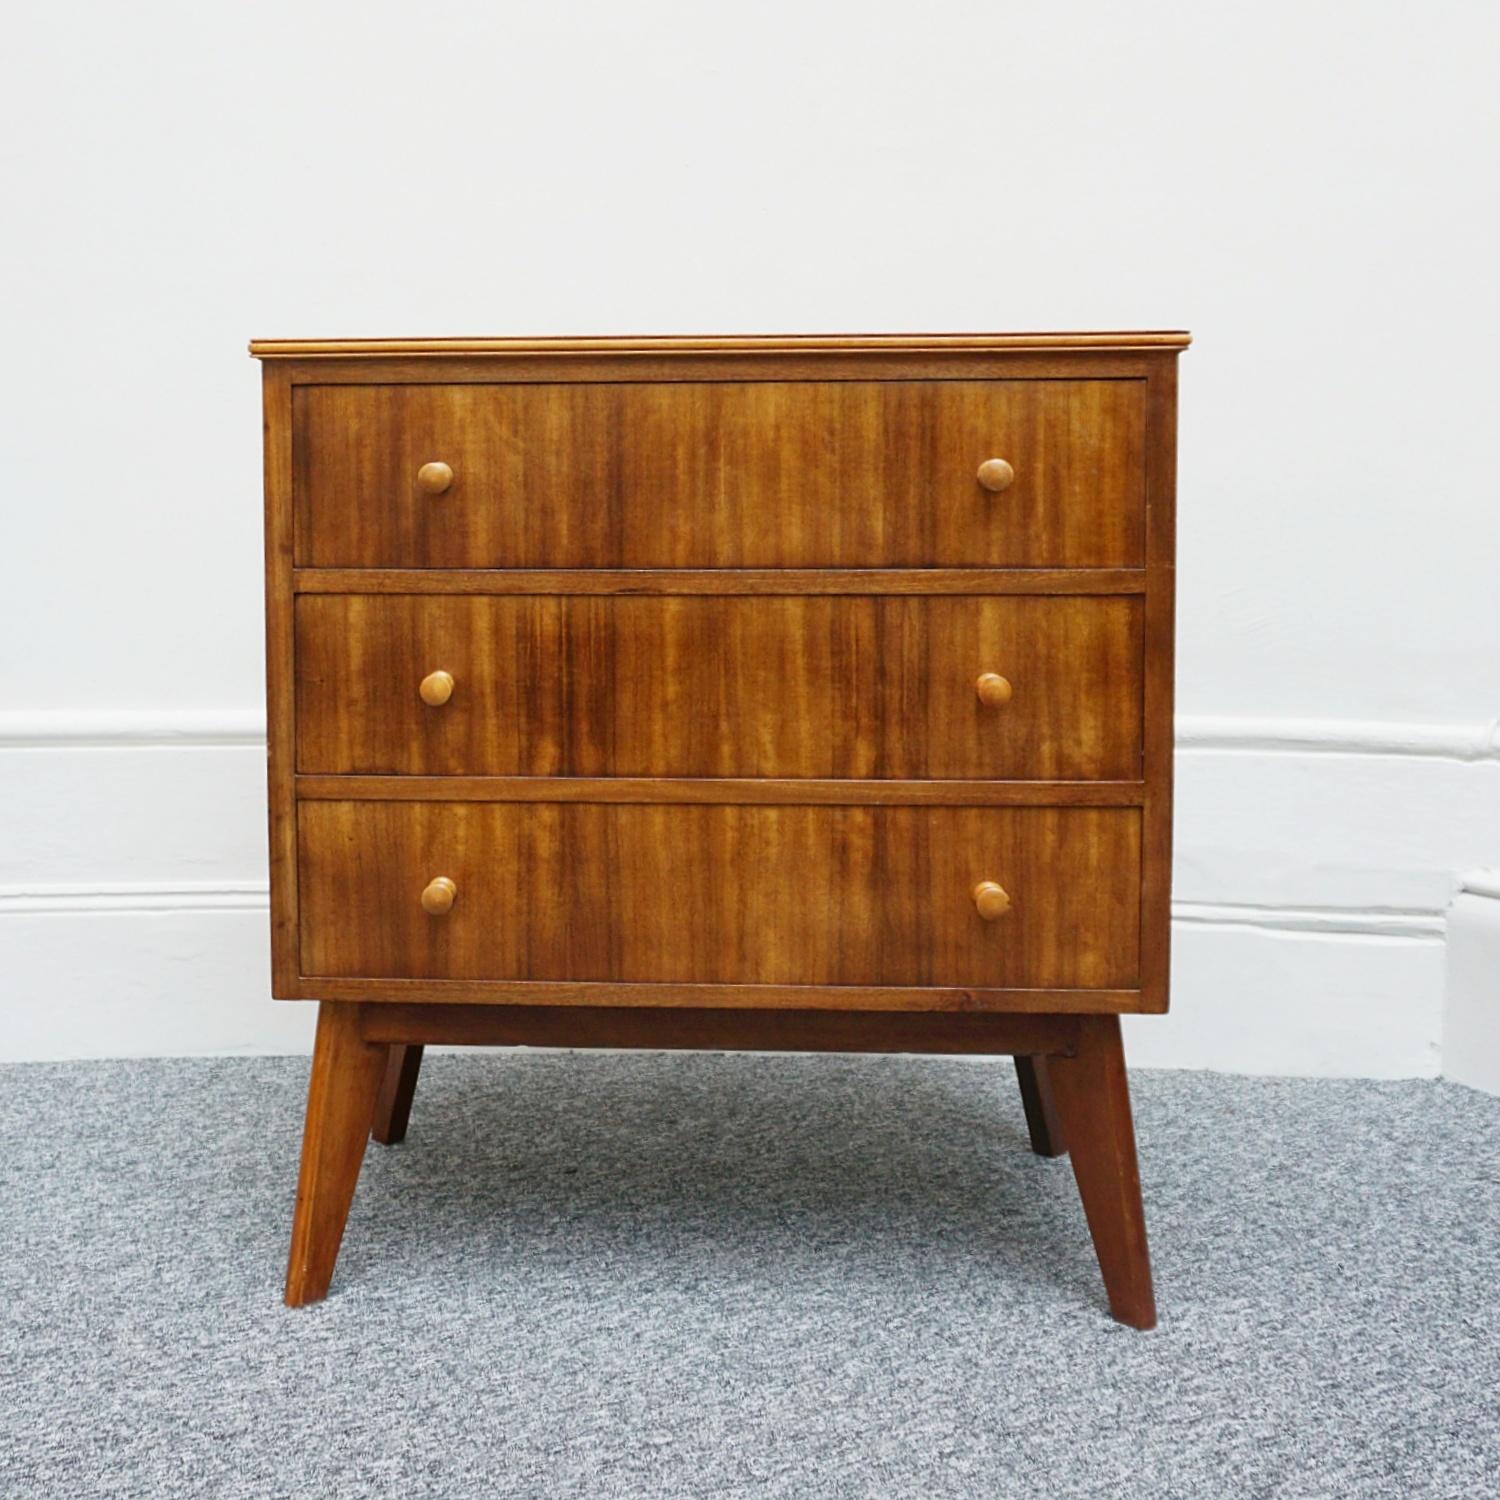 A Pair of Mid-Century 'Cumbrae' range chests of drawers by Moriss of Glasgow. Zebra wood with sycamore banding and handles. Set over outward angled legs. Four well proportioned drawers. labelled to inside of upper drawer and to back of each chest.